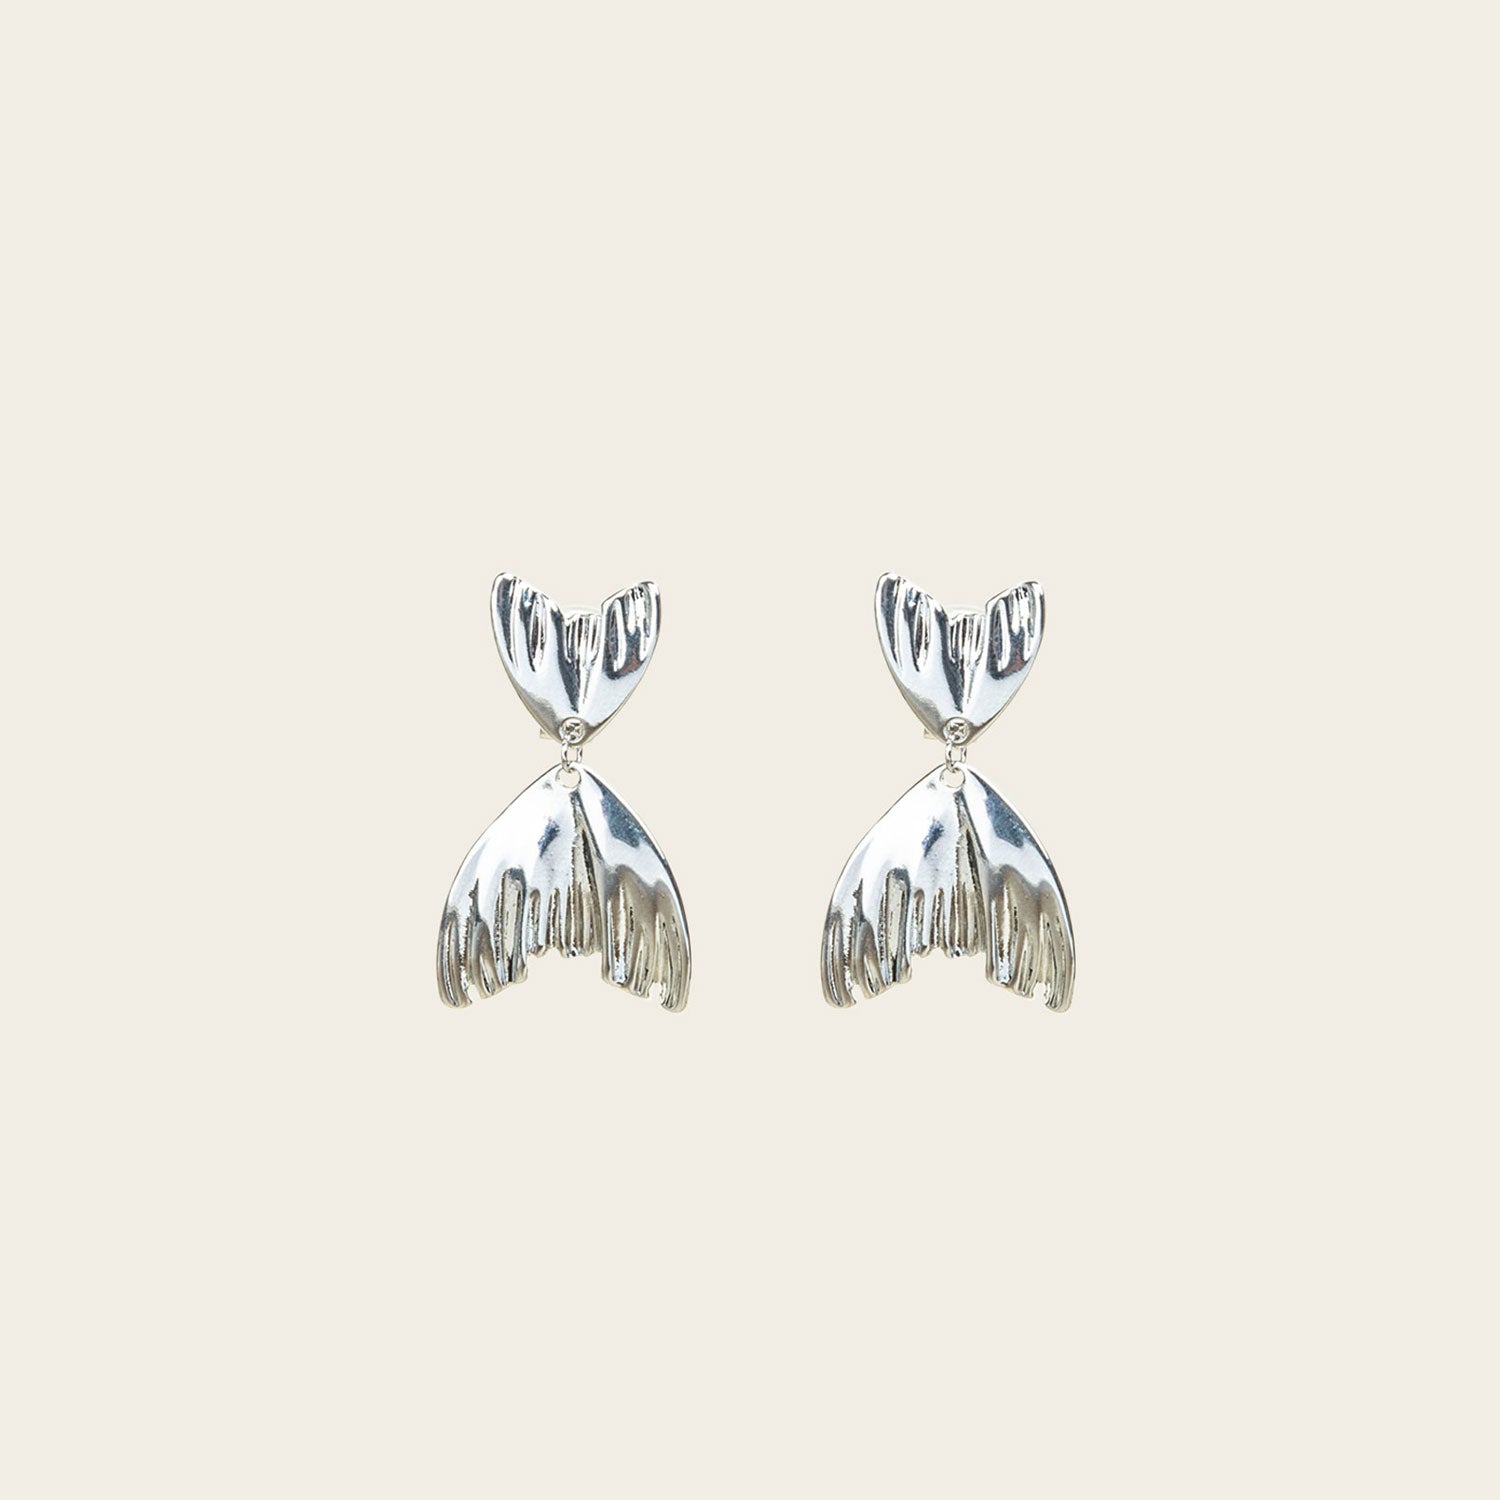 Image of the Mermaid Tail Clip On Earrings crafted in Silver Tone Zinc Alloy provide a secure hold for 8 to 12 hours. Padded Clip-On style is ideal for all ear types, and the earrings come as one pair with removable rubber padding. No adjustments possible.